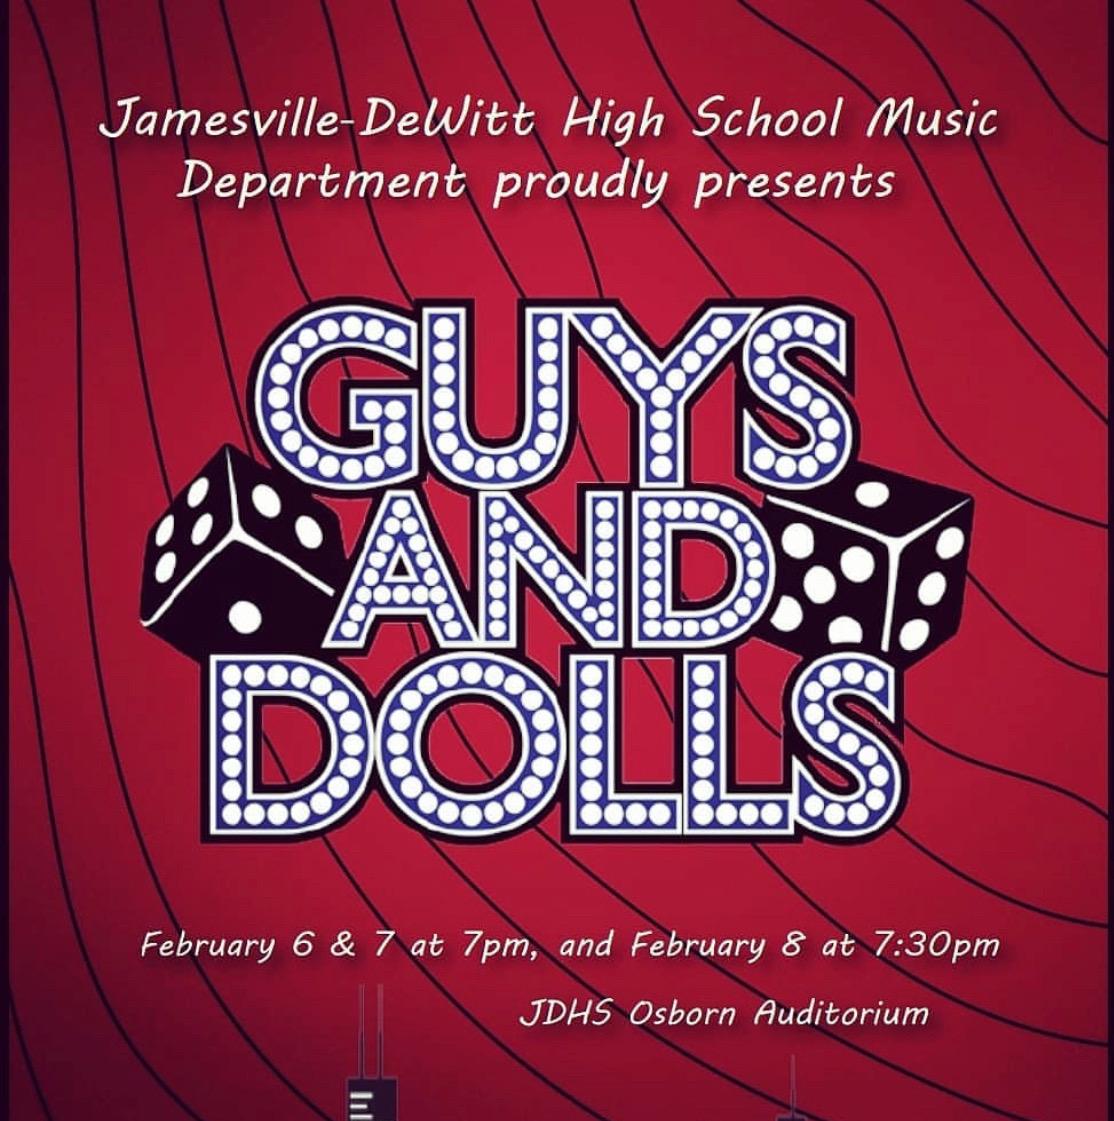 J-DHS+To+Perform+Popular+Broadway+Musical+Hit+Guys+and+Dolls+in+February